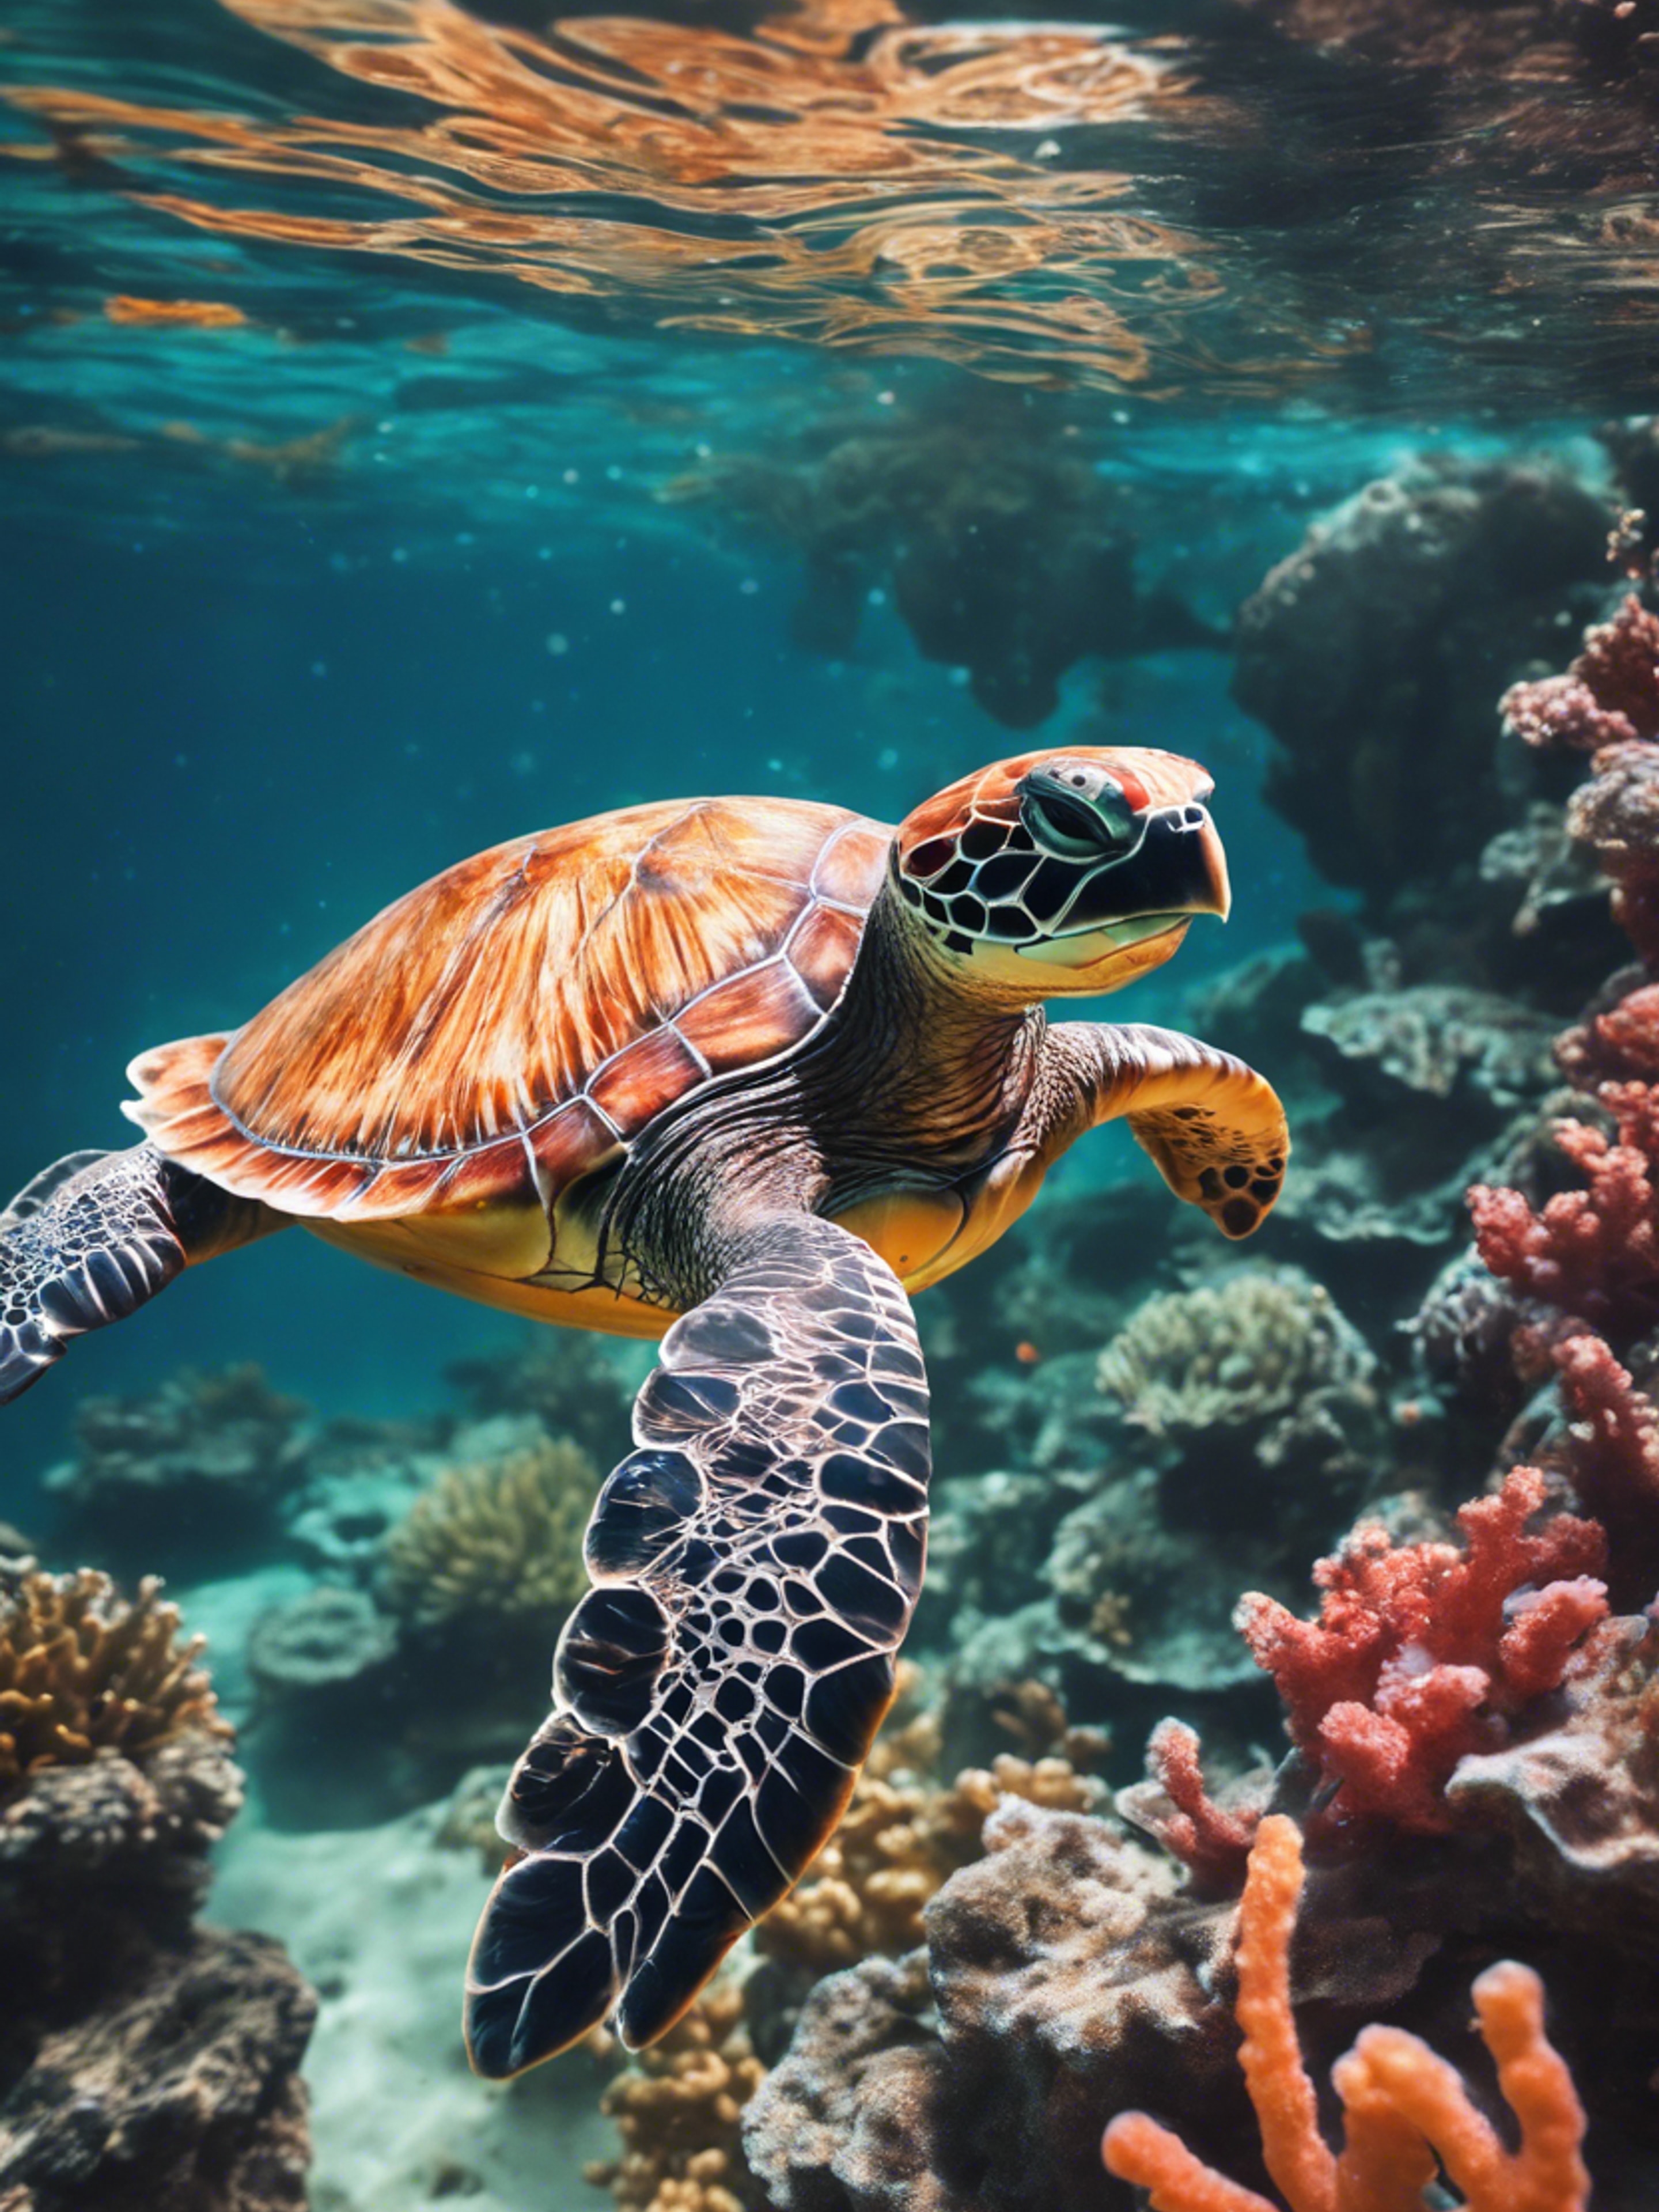 Underwater shot of a sea turtle gliding through clusters of colorful coral.壁紙[31f5dd2c5e3745af9533]